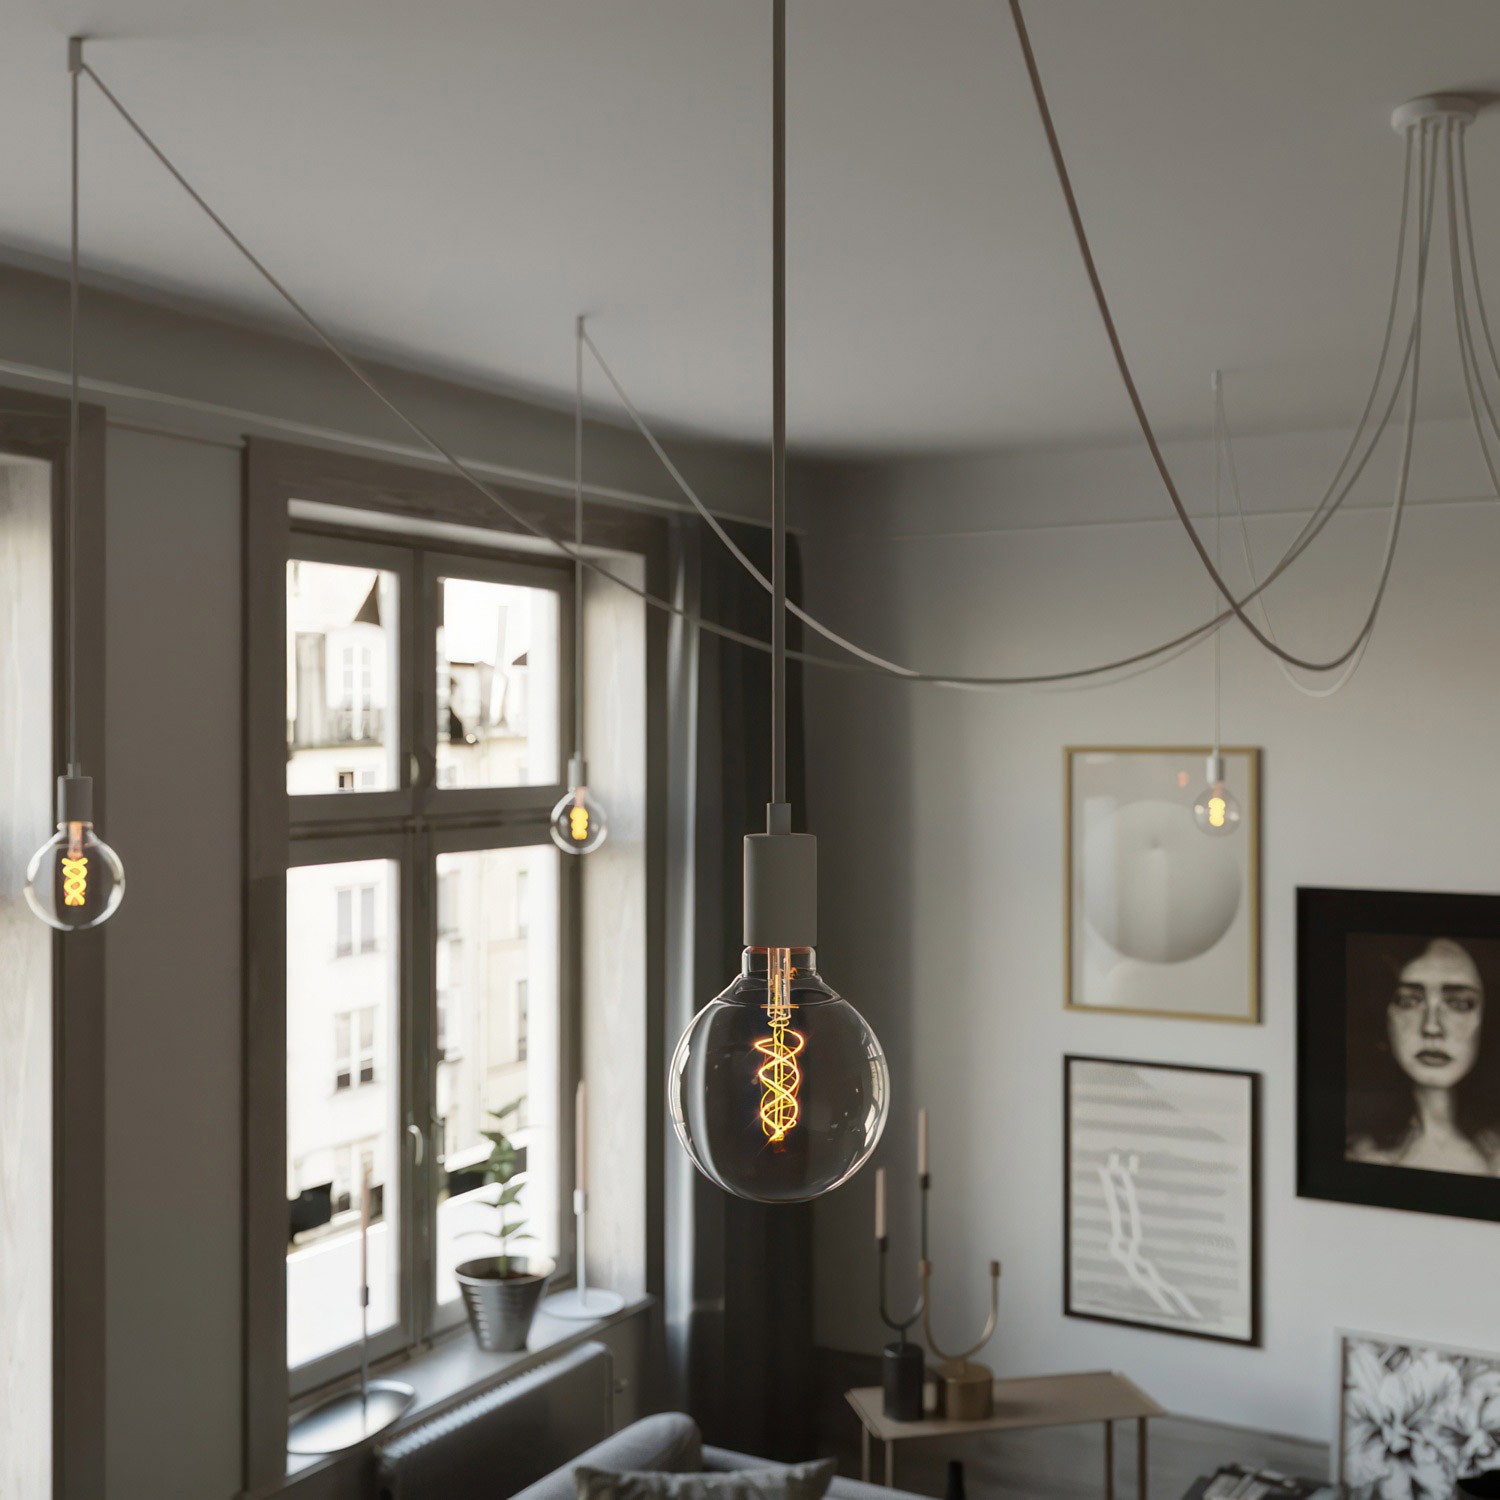 Spider - Suspension with 7 pendants Made in Italy complete with bulbs, fabric cable, and metal finishes